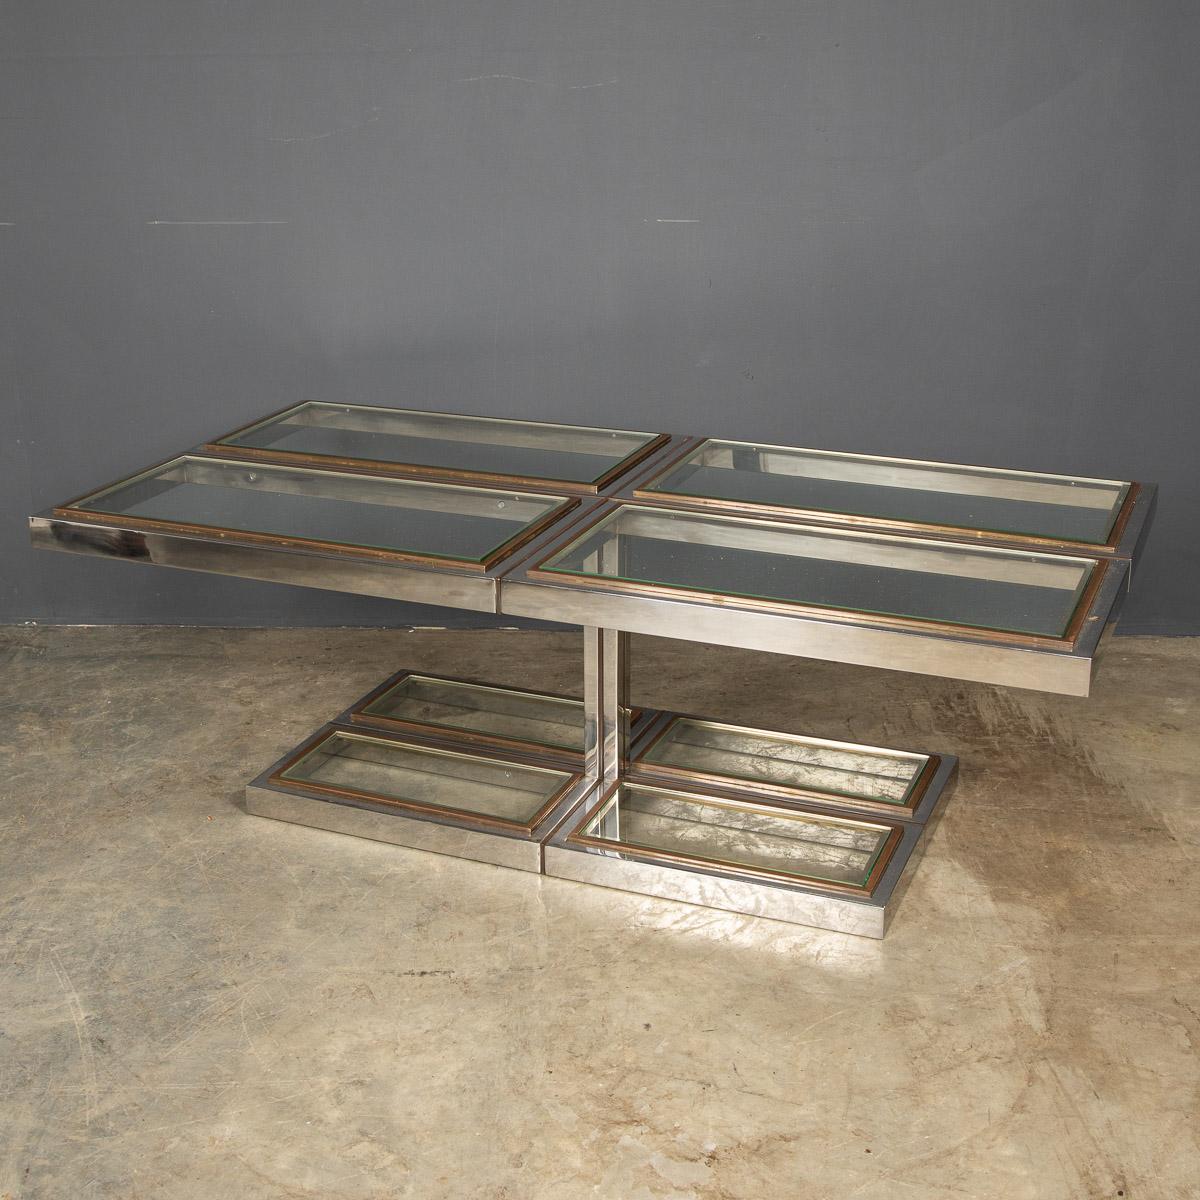 Striking 20th century Italian chromed metal, brass and glass pedestal coffee table, with four glass panels at the foot and four glass panels on the top, made in the 1970's.

Condition
In great condition - wear consistent with age.

Size
Width: